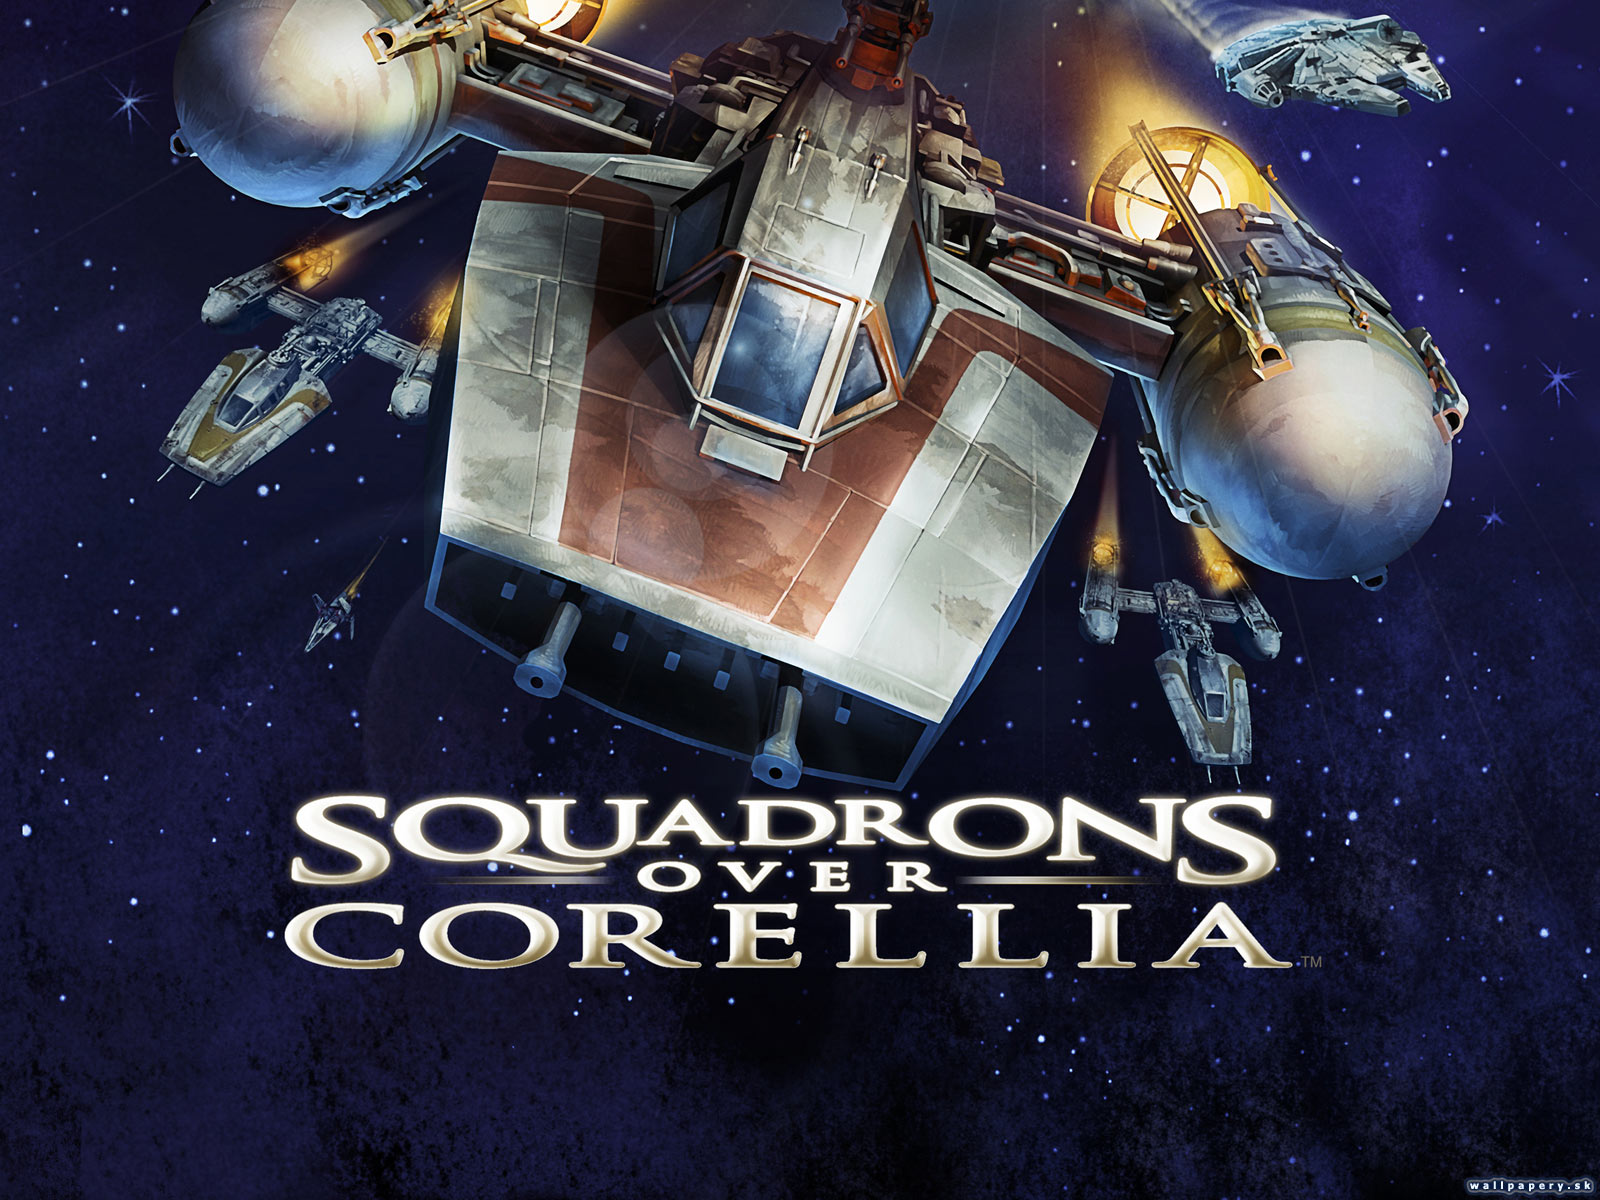 Star Wars Galaxies - Trading Card Game: Squadrons Over Corellia - wallpaper 2